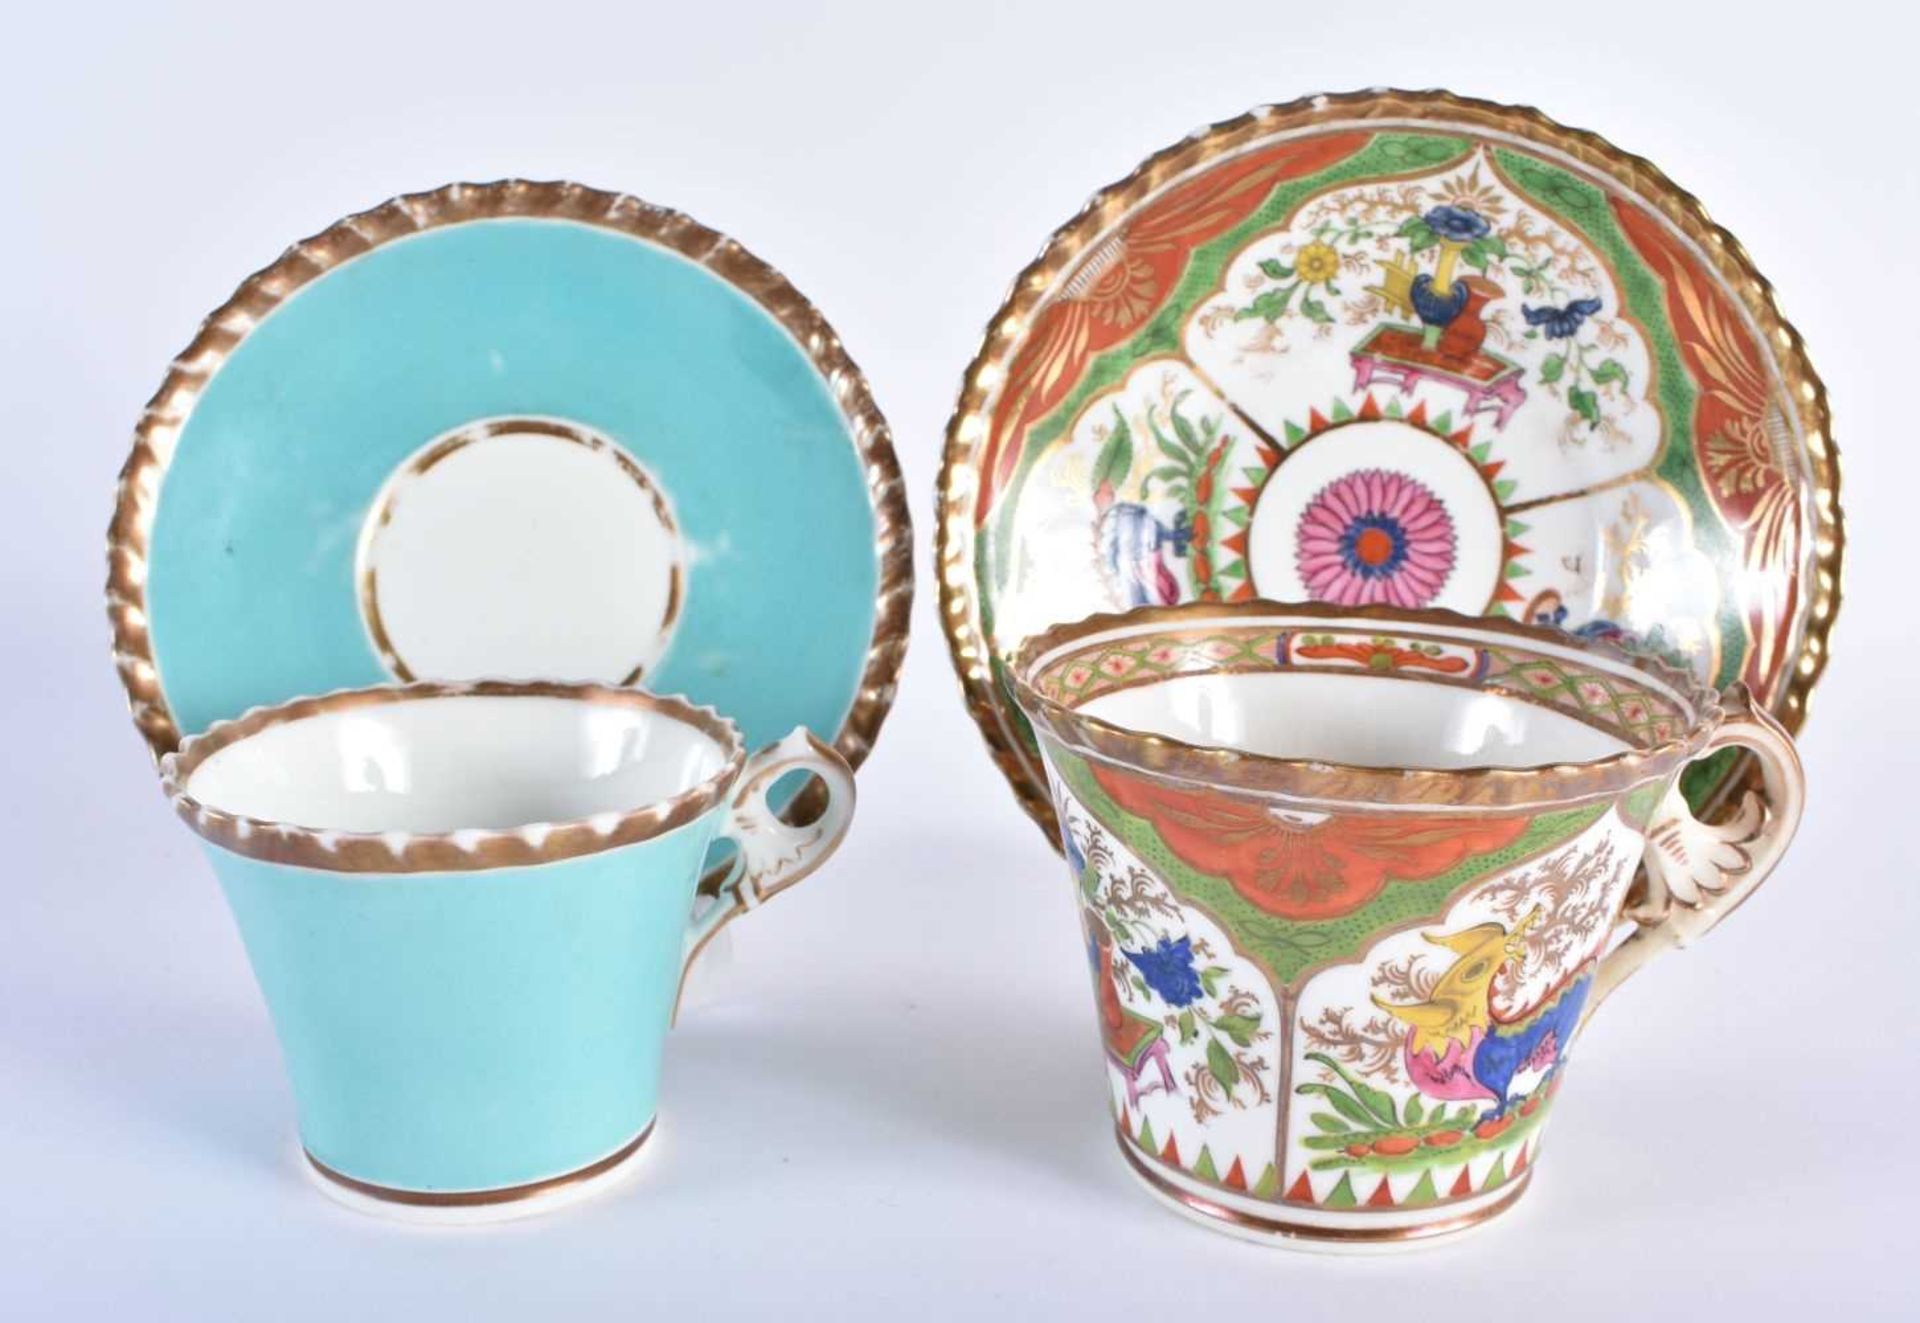 TWO EARLY 19TH CENTURY CHAMBERLAINS WORCESTER CUPS AND SAUCERS one painted with turquoise, the other